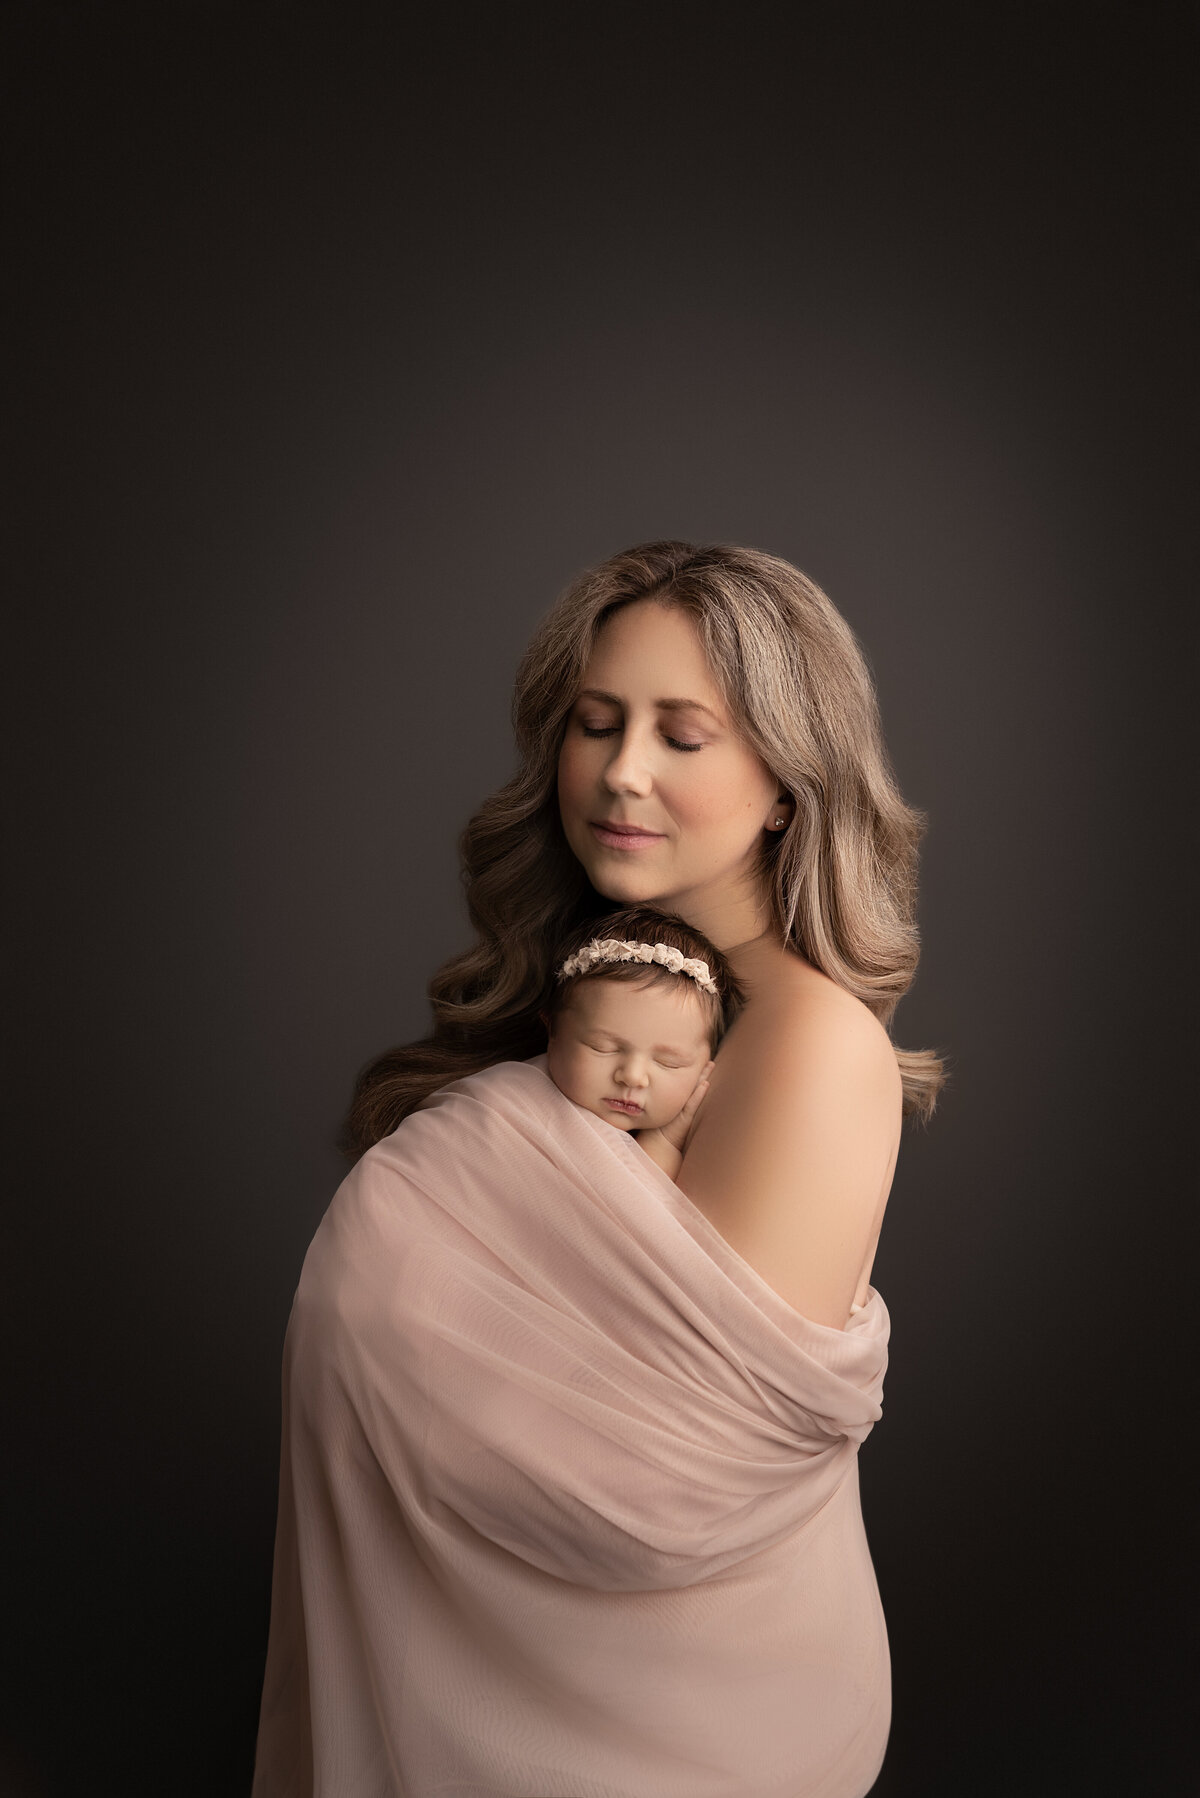 Fine art newborn photos captured by best Main Line newborn photographer Katie Marshall. Mom is holding her newborn baby girl, draped in a blush organza fabric. Baby girl is sleeping on mom's chest with one hand under her head. Mom's eyes are gently closed.